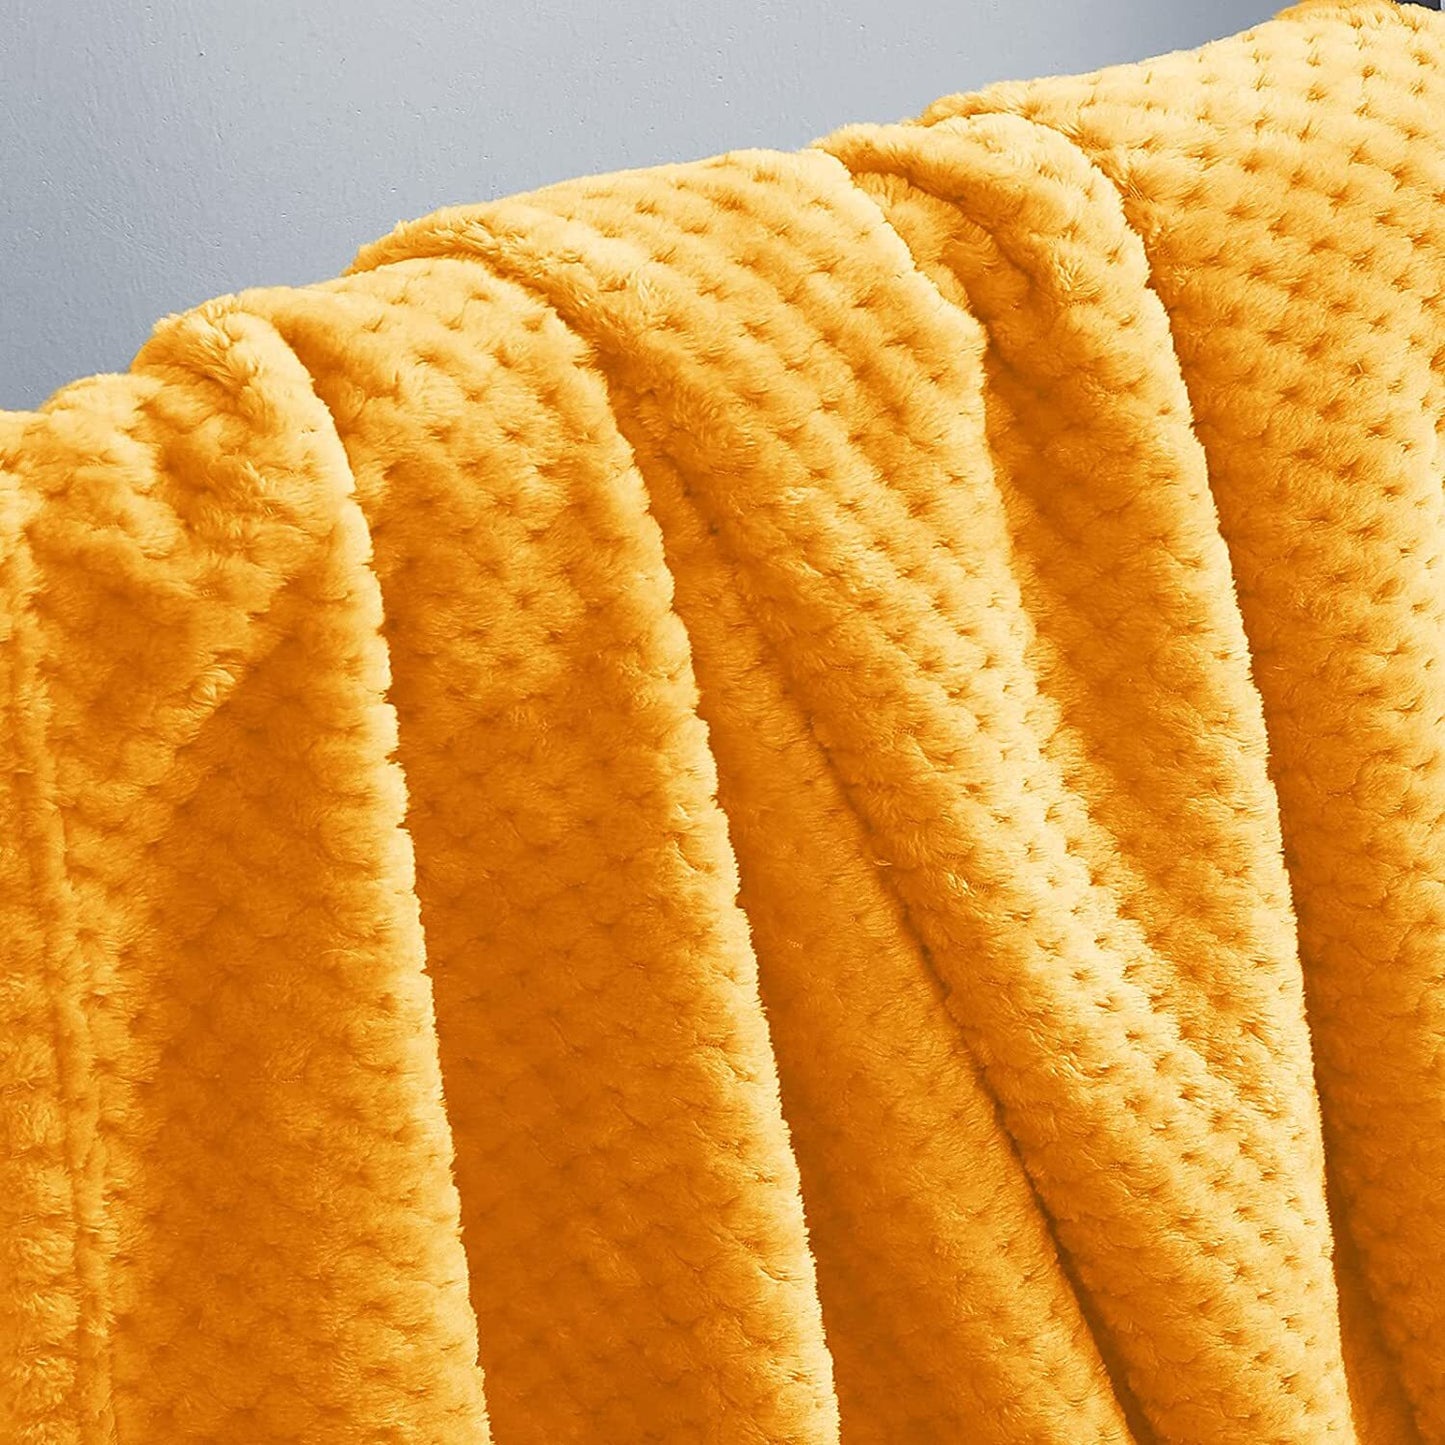 Exclusivo Mezcla Waffle Textured Fleece Baby Blanket, Soft and Warm Swaddle Blanket, Infant, Newborn, Toddler and Kids Receiving Blankets for Crib Stroller (Mustard Yellow, 40x50 inches)